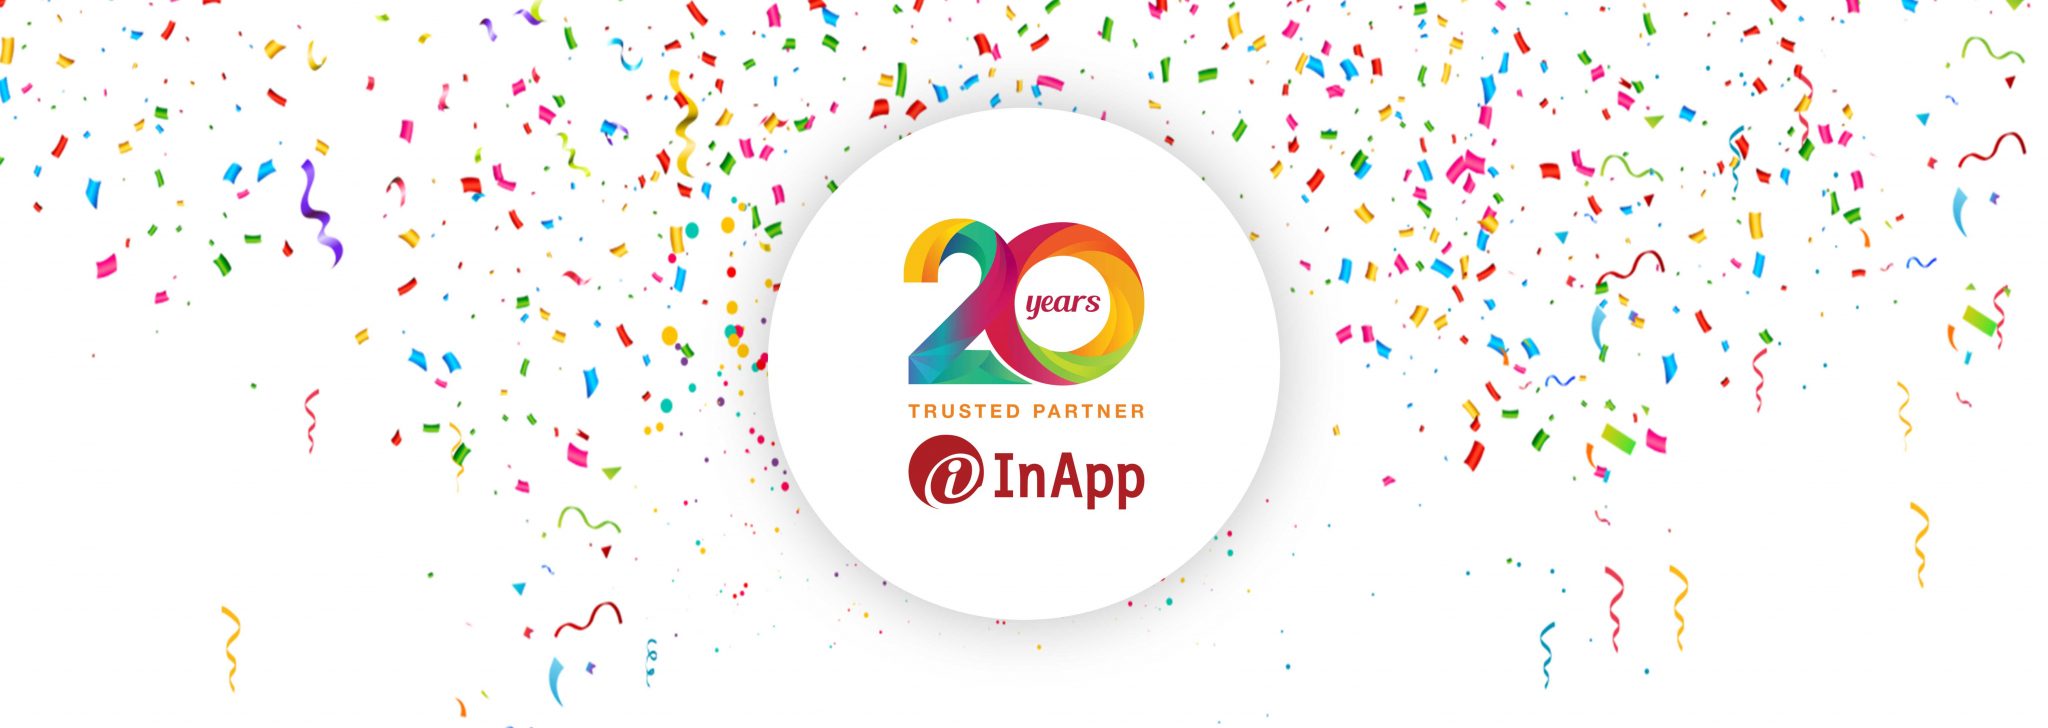 InApp Completes Two Decades in Business